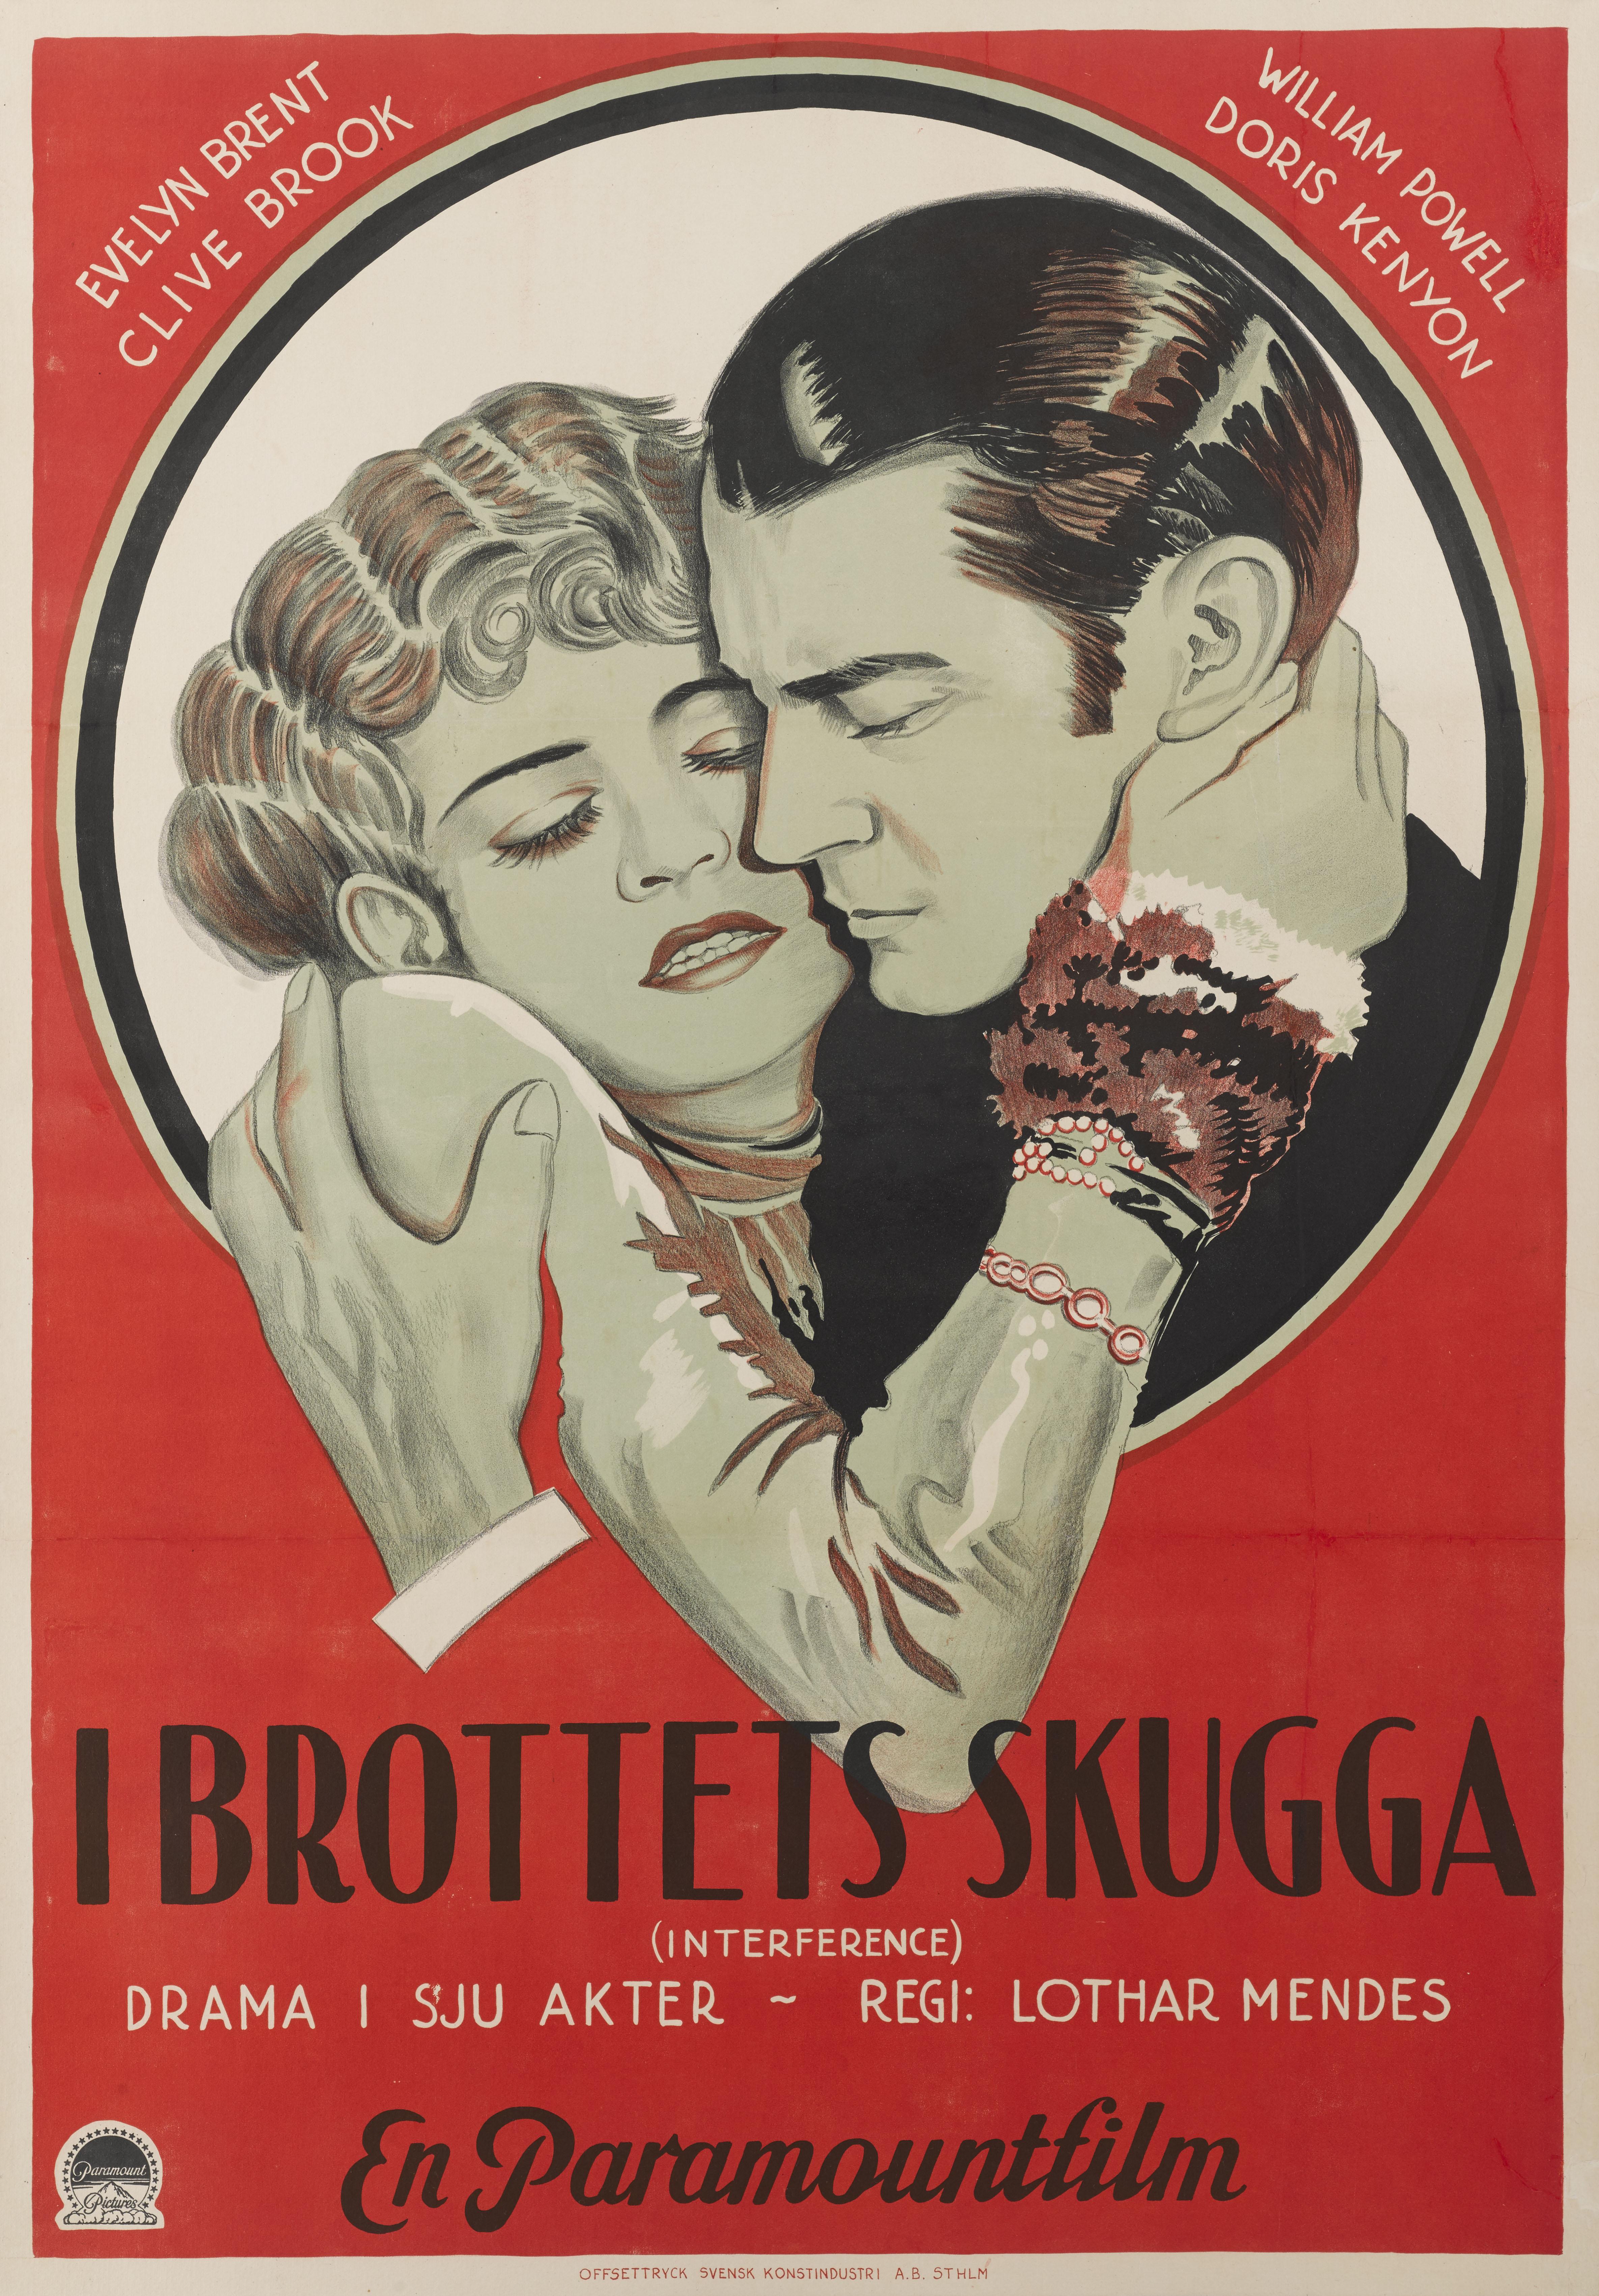 Original Swedish film poster for the 1928 American drama film Interference.
The film was directed by Lothar Mendes and Roy Pomeroy and starred William Powell, Evelyn Brent and Clive Brook
This Swedish poster was created for the films first Swedish